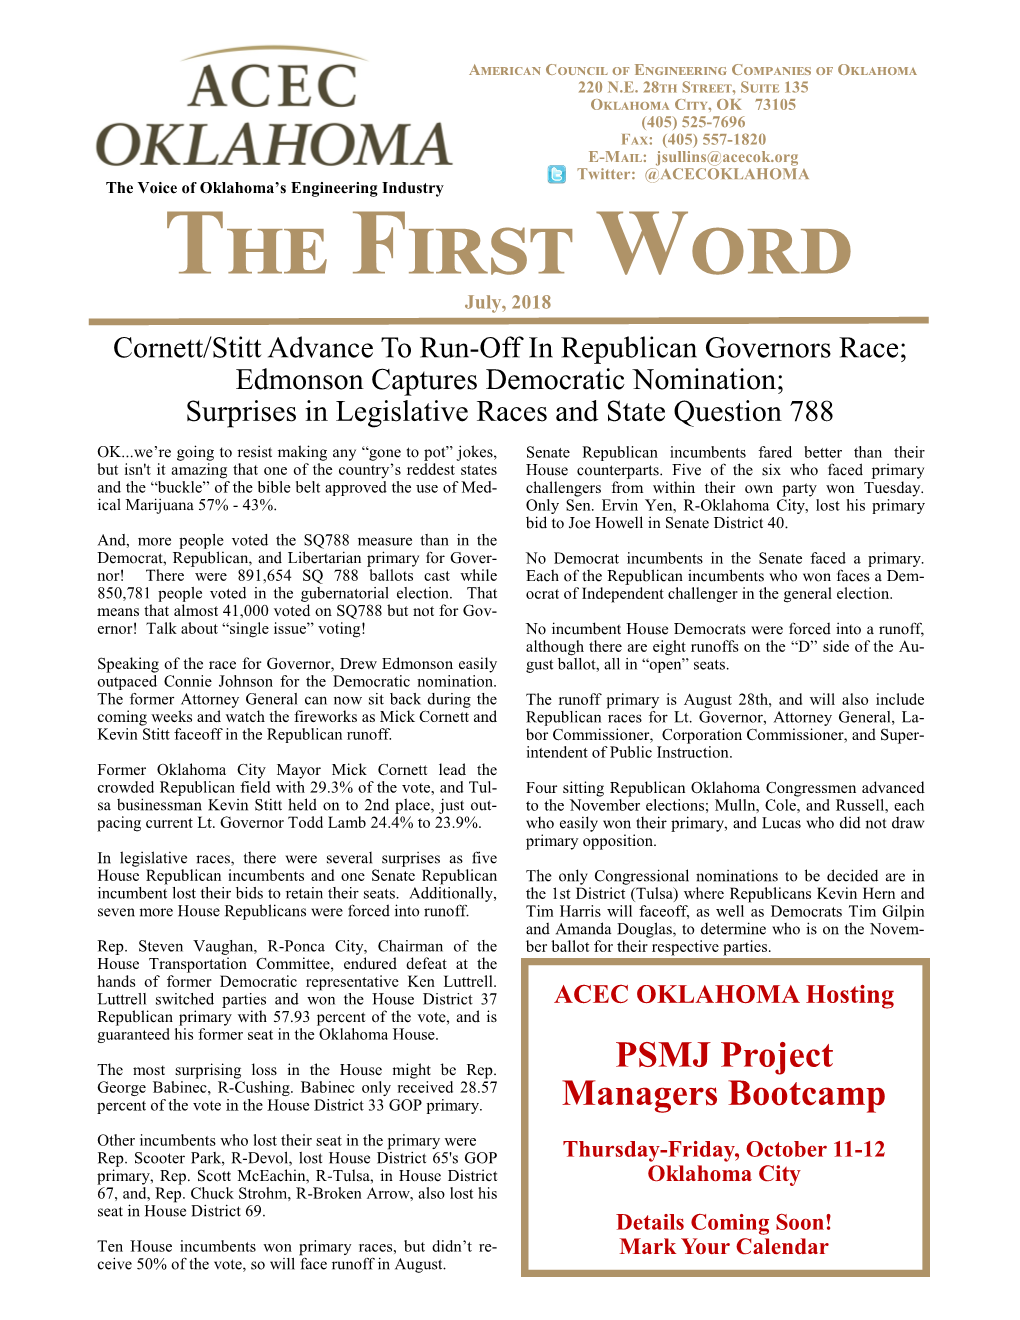 The First Word, July, 2018